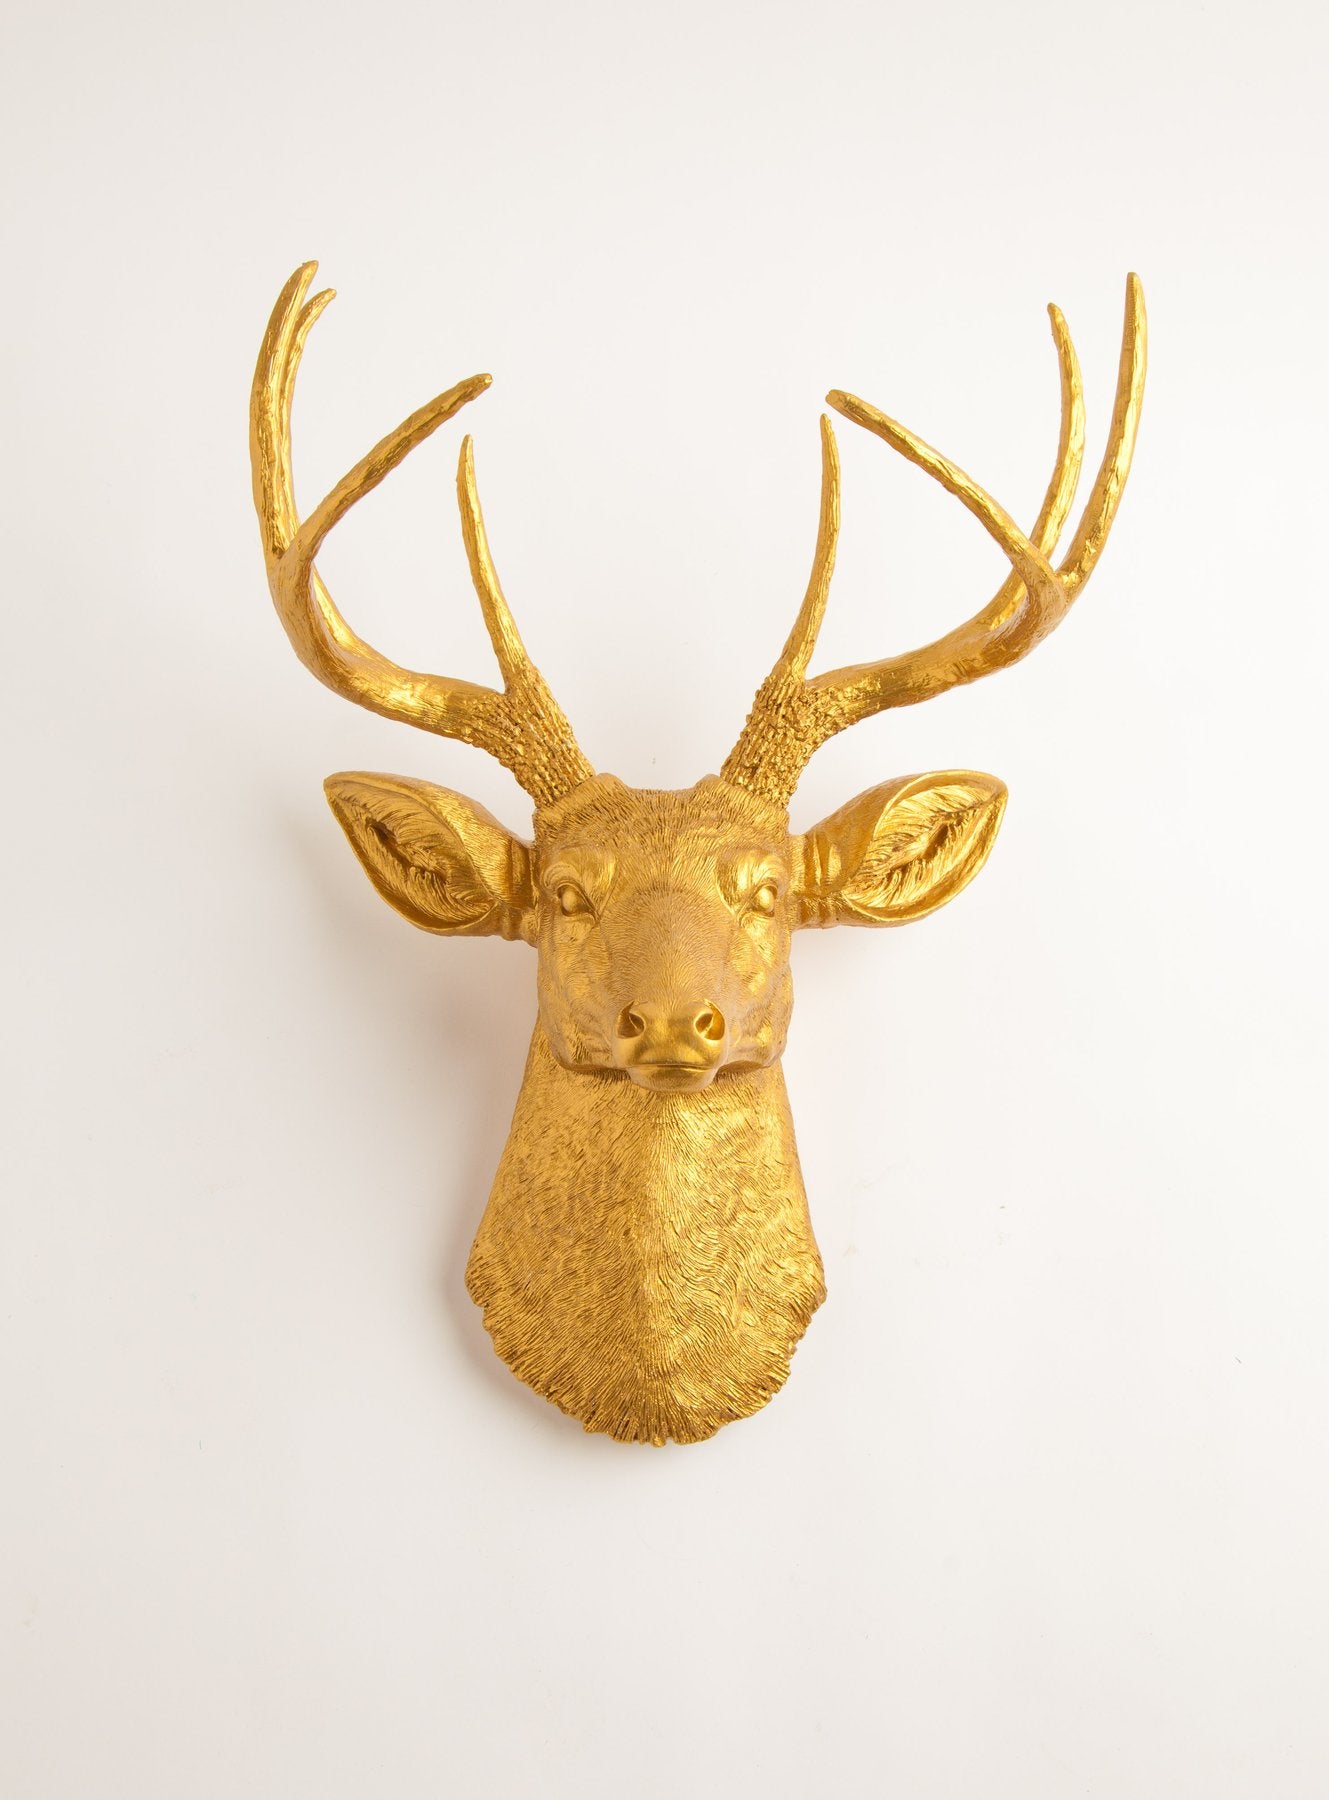 Chrome Deer Wall Mount Trophy | Resin Taxidermy